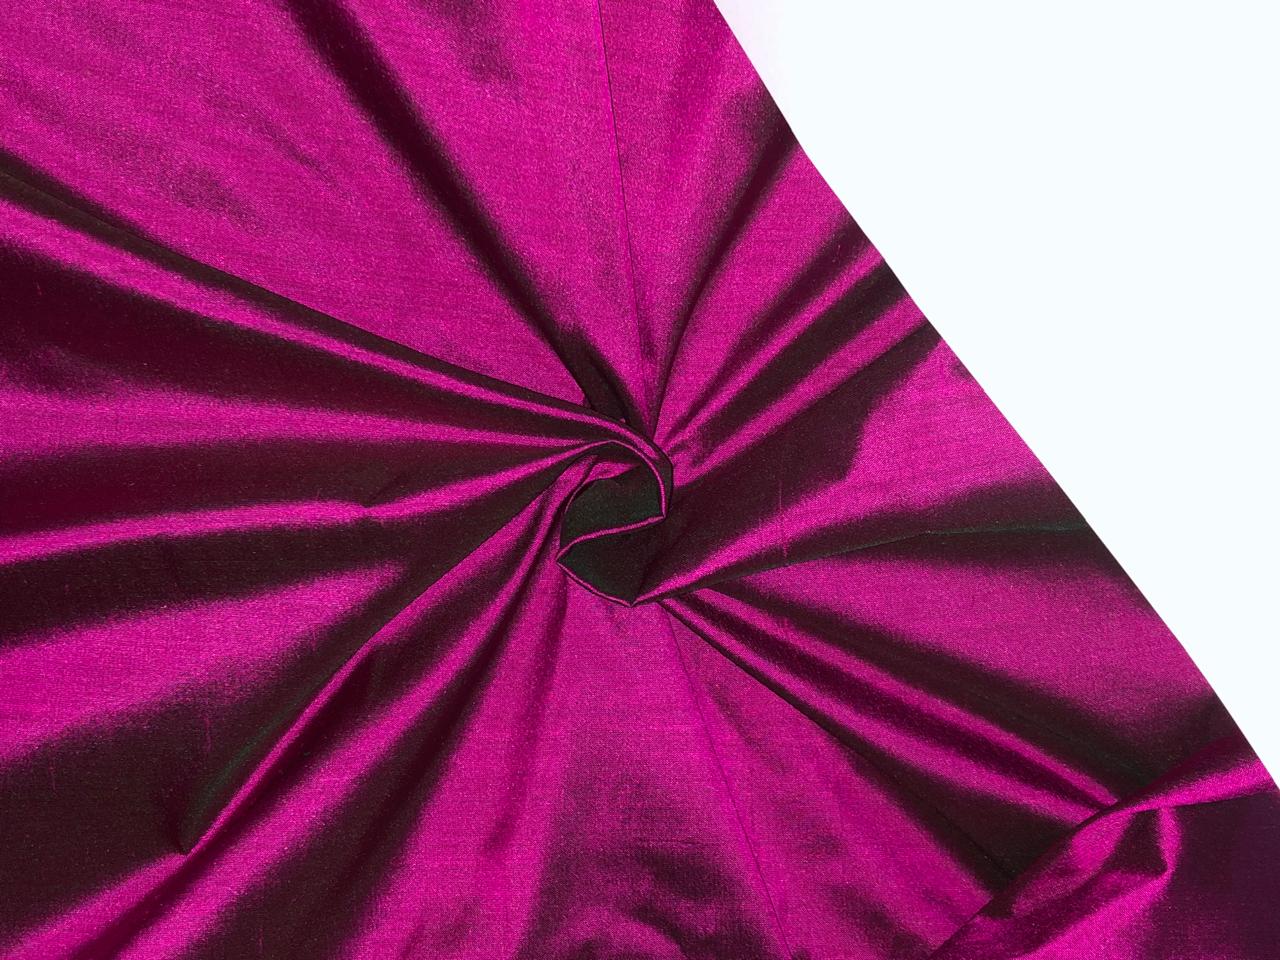 Silk Dupion fabric Bright pink x black color 54" wide DUP403